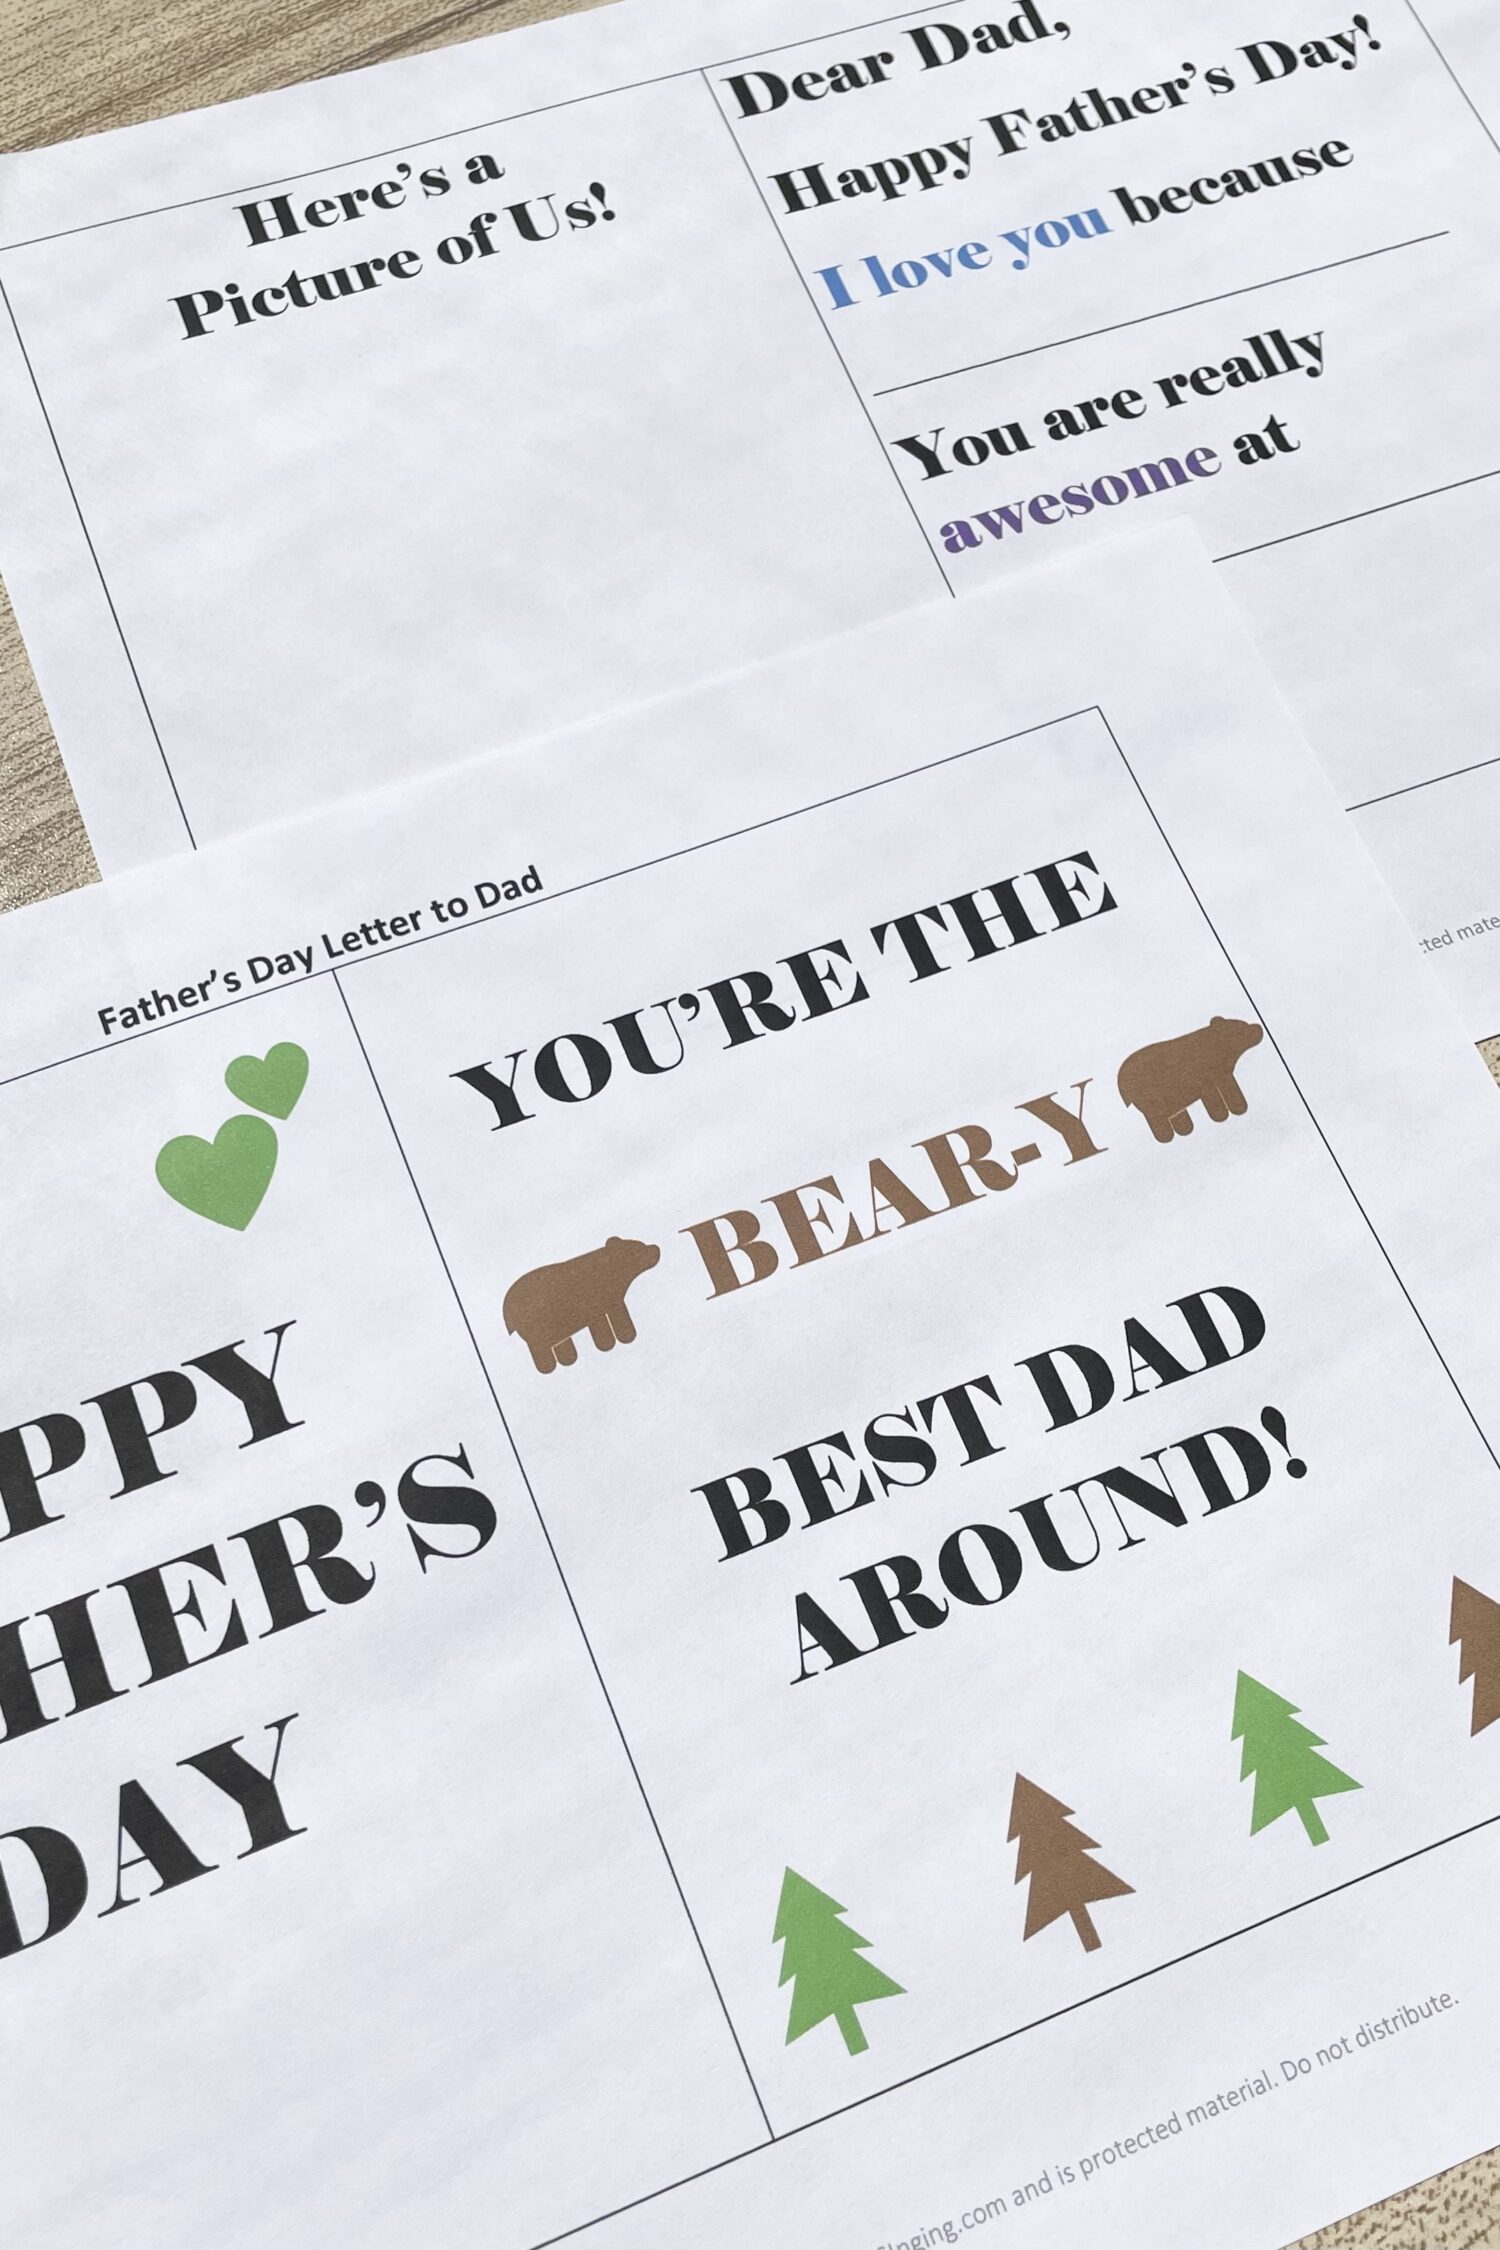 Father's Day Letter to Dad singing time idea - use this homemade printable card to write letters to dad during primary for LDS Primary Music Leaders.